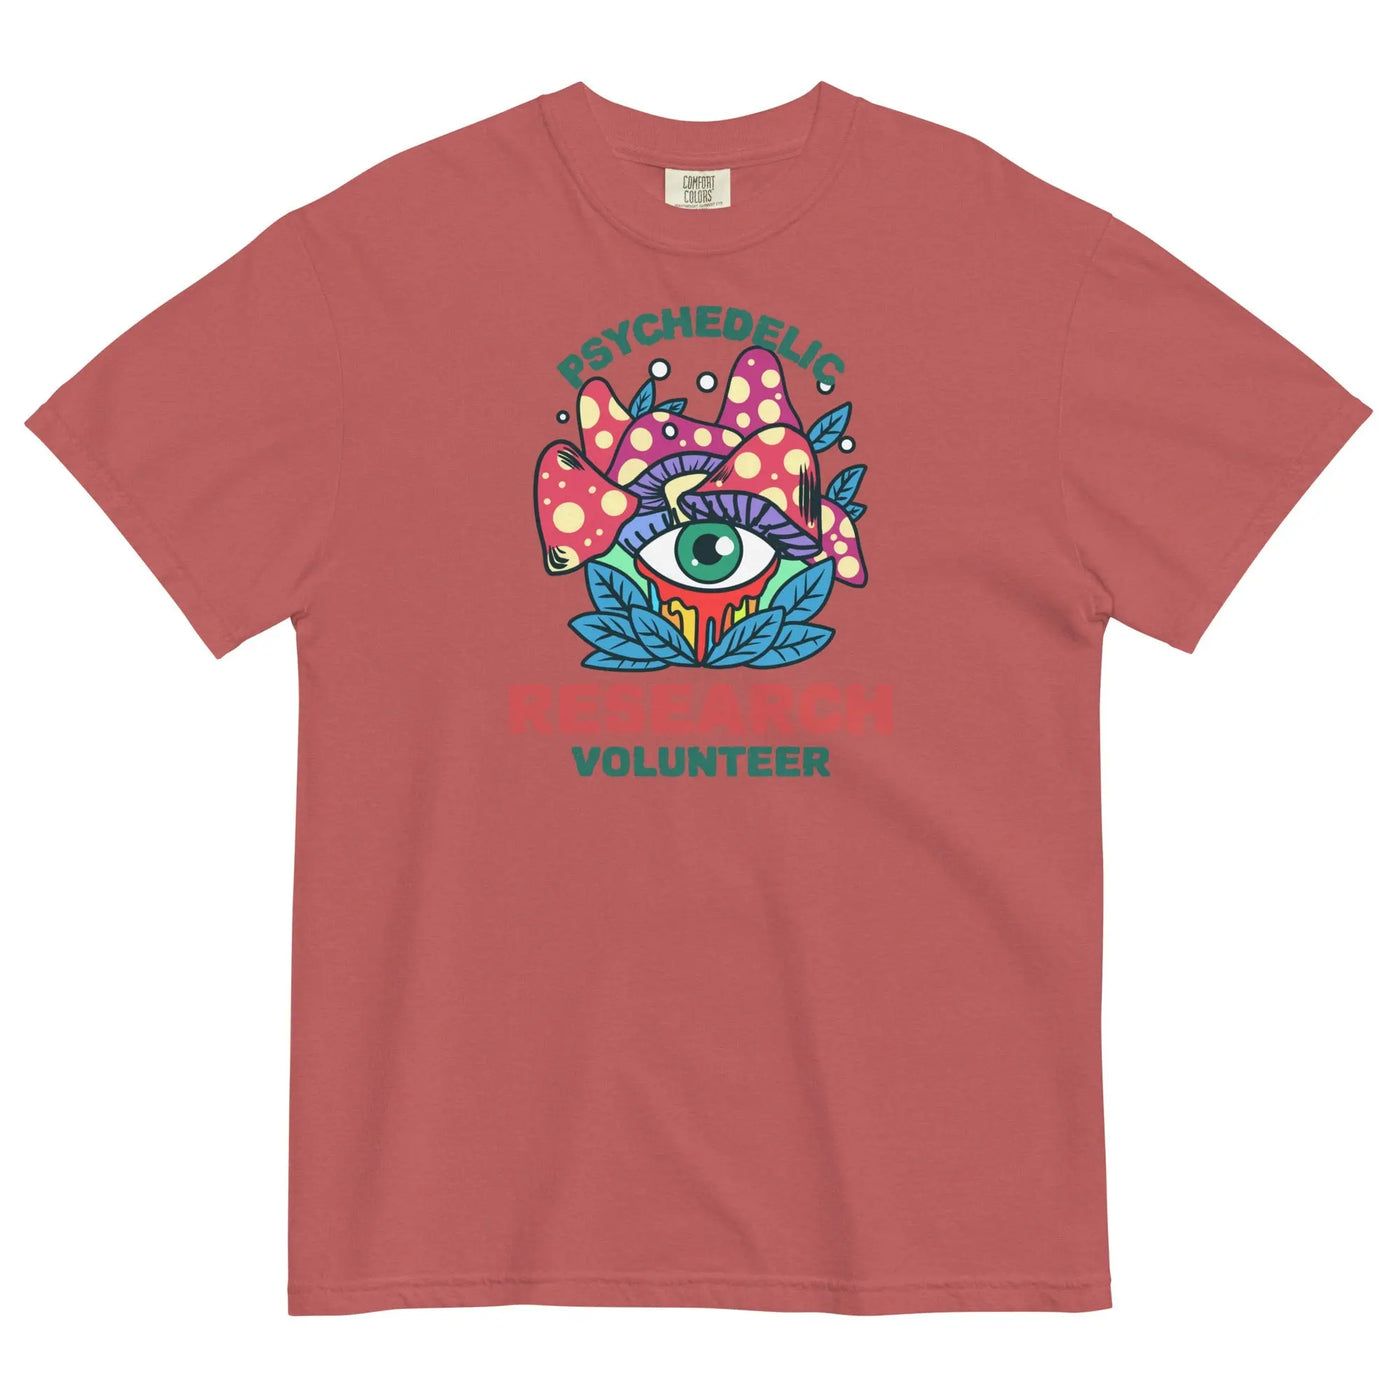 Psychedelic Research Unisex T-Shirt